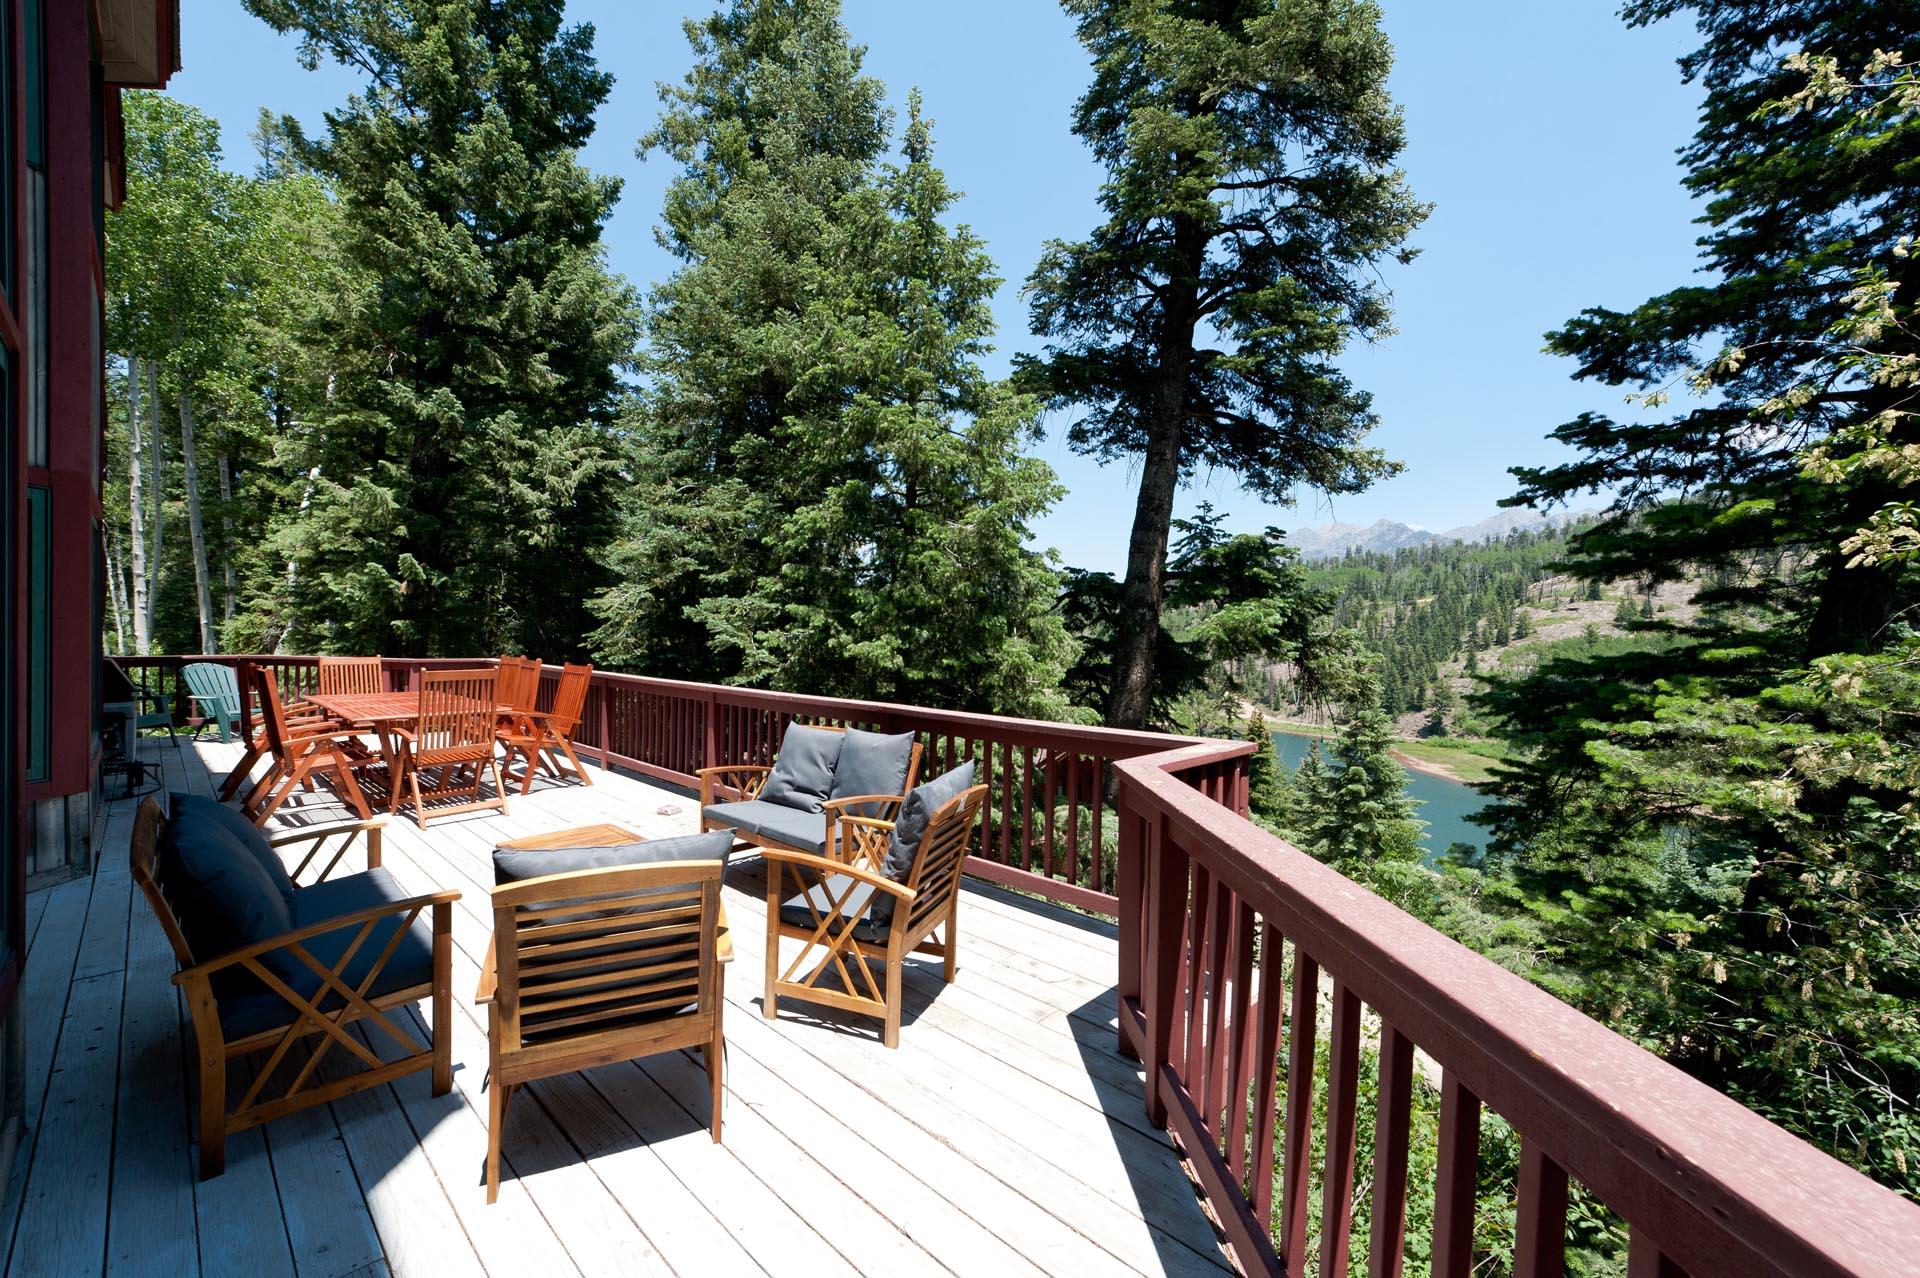 Views of Columbine Lake from the deck off the main living space